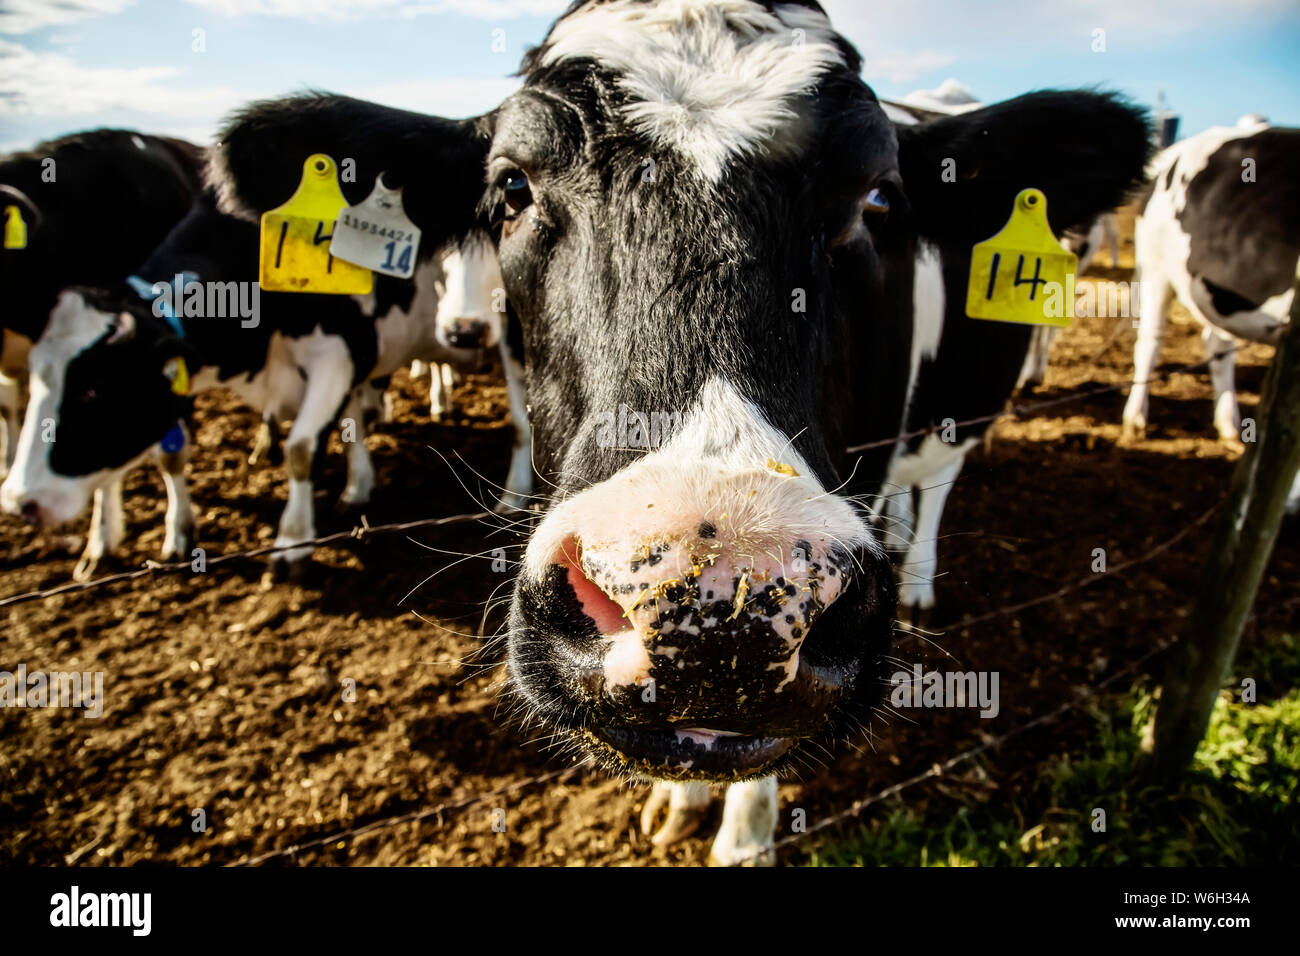 Close-up of the head of a Holstein cow standing at a barb wire fence making a funny face, with identification tags in it's ears on a robotic dairy ... Stock Photo